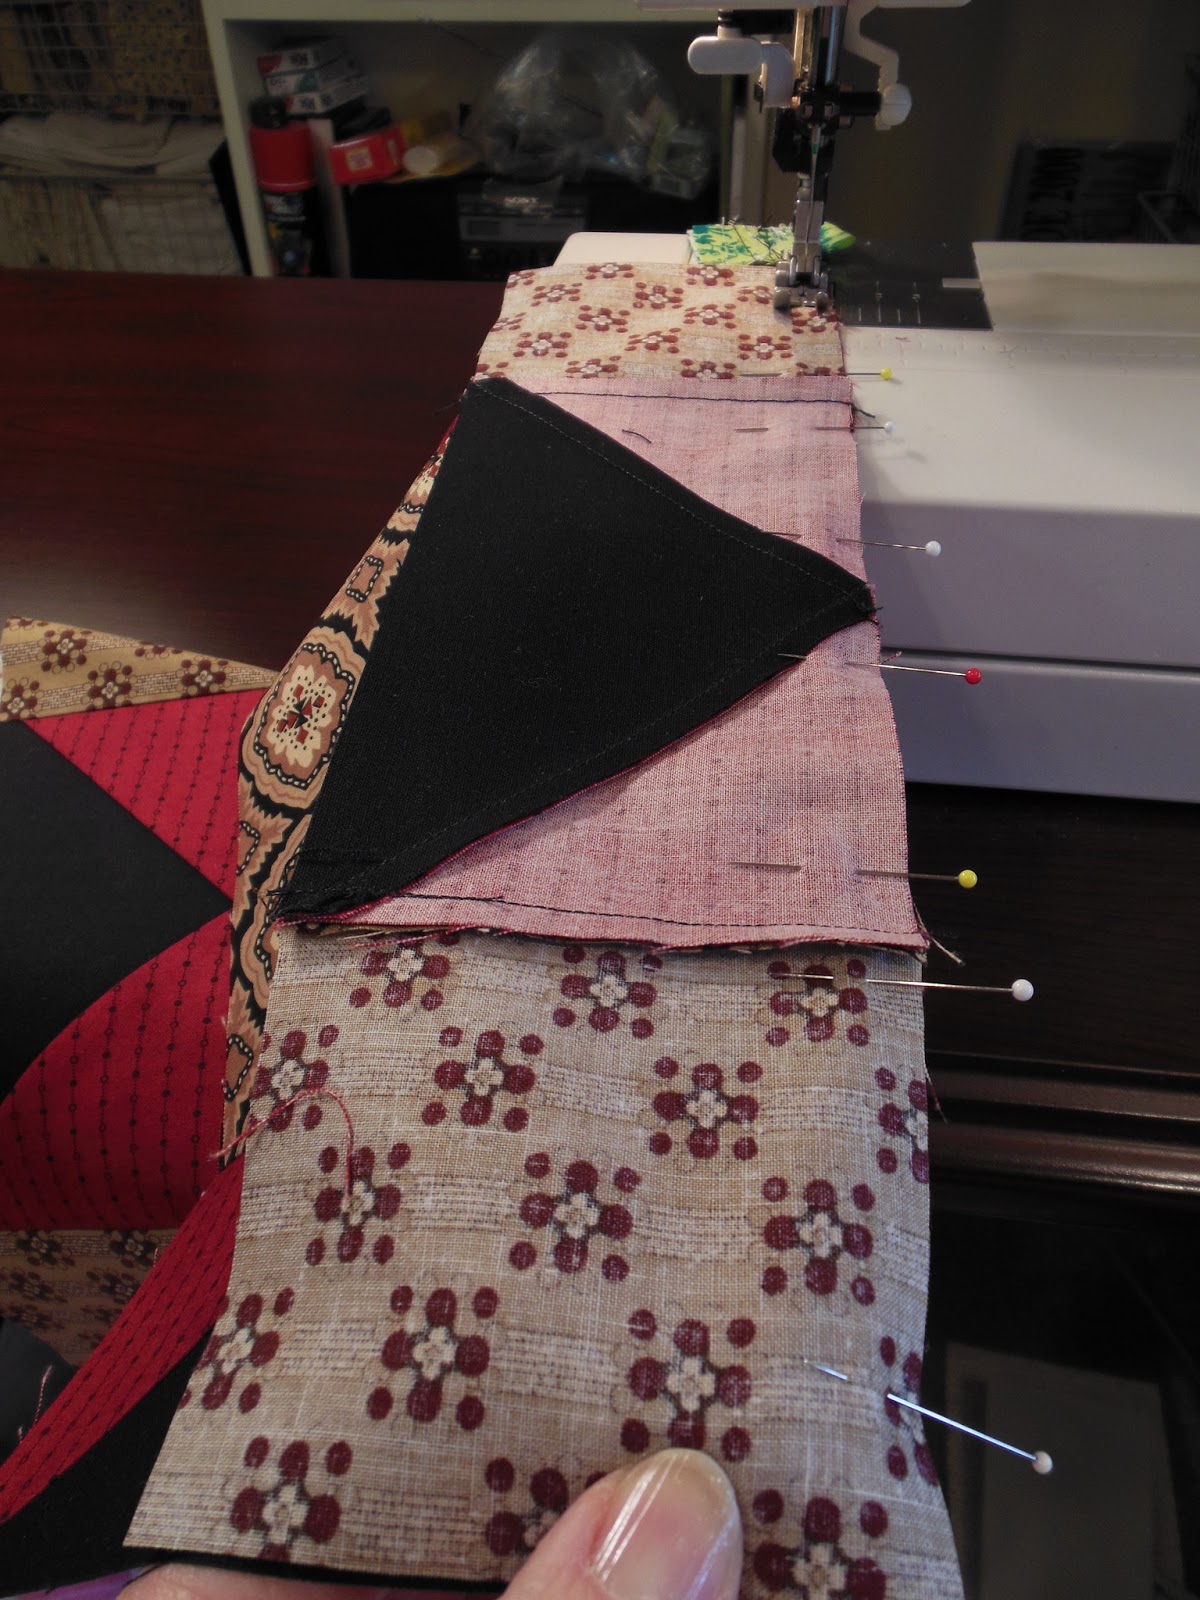 Linda Thielfoldt ~The Quilted Goose: Let's Get Ready to Rumble Part 2